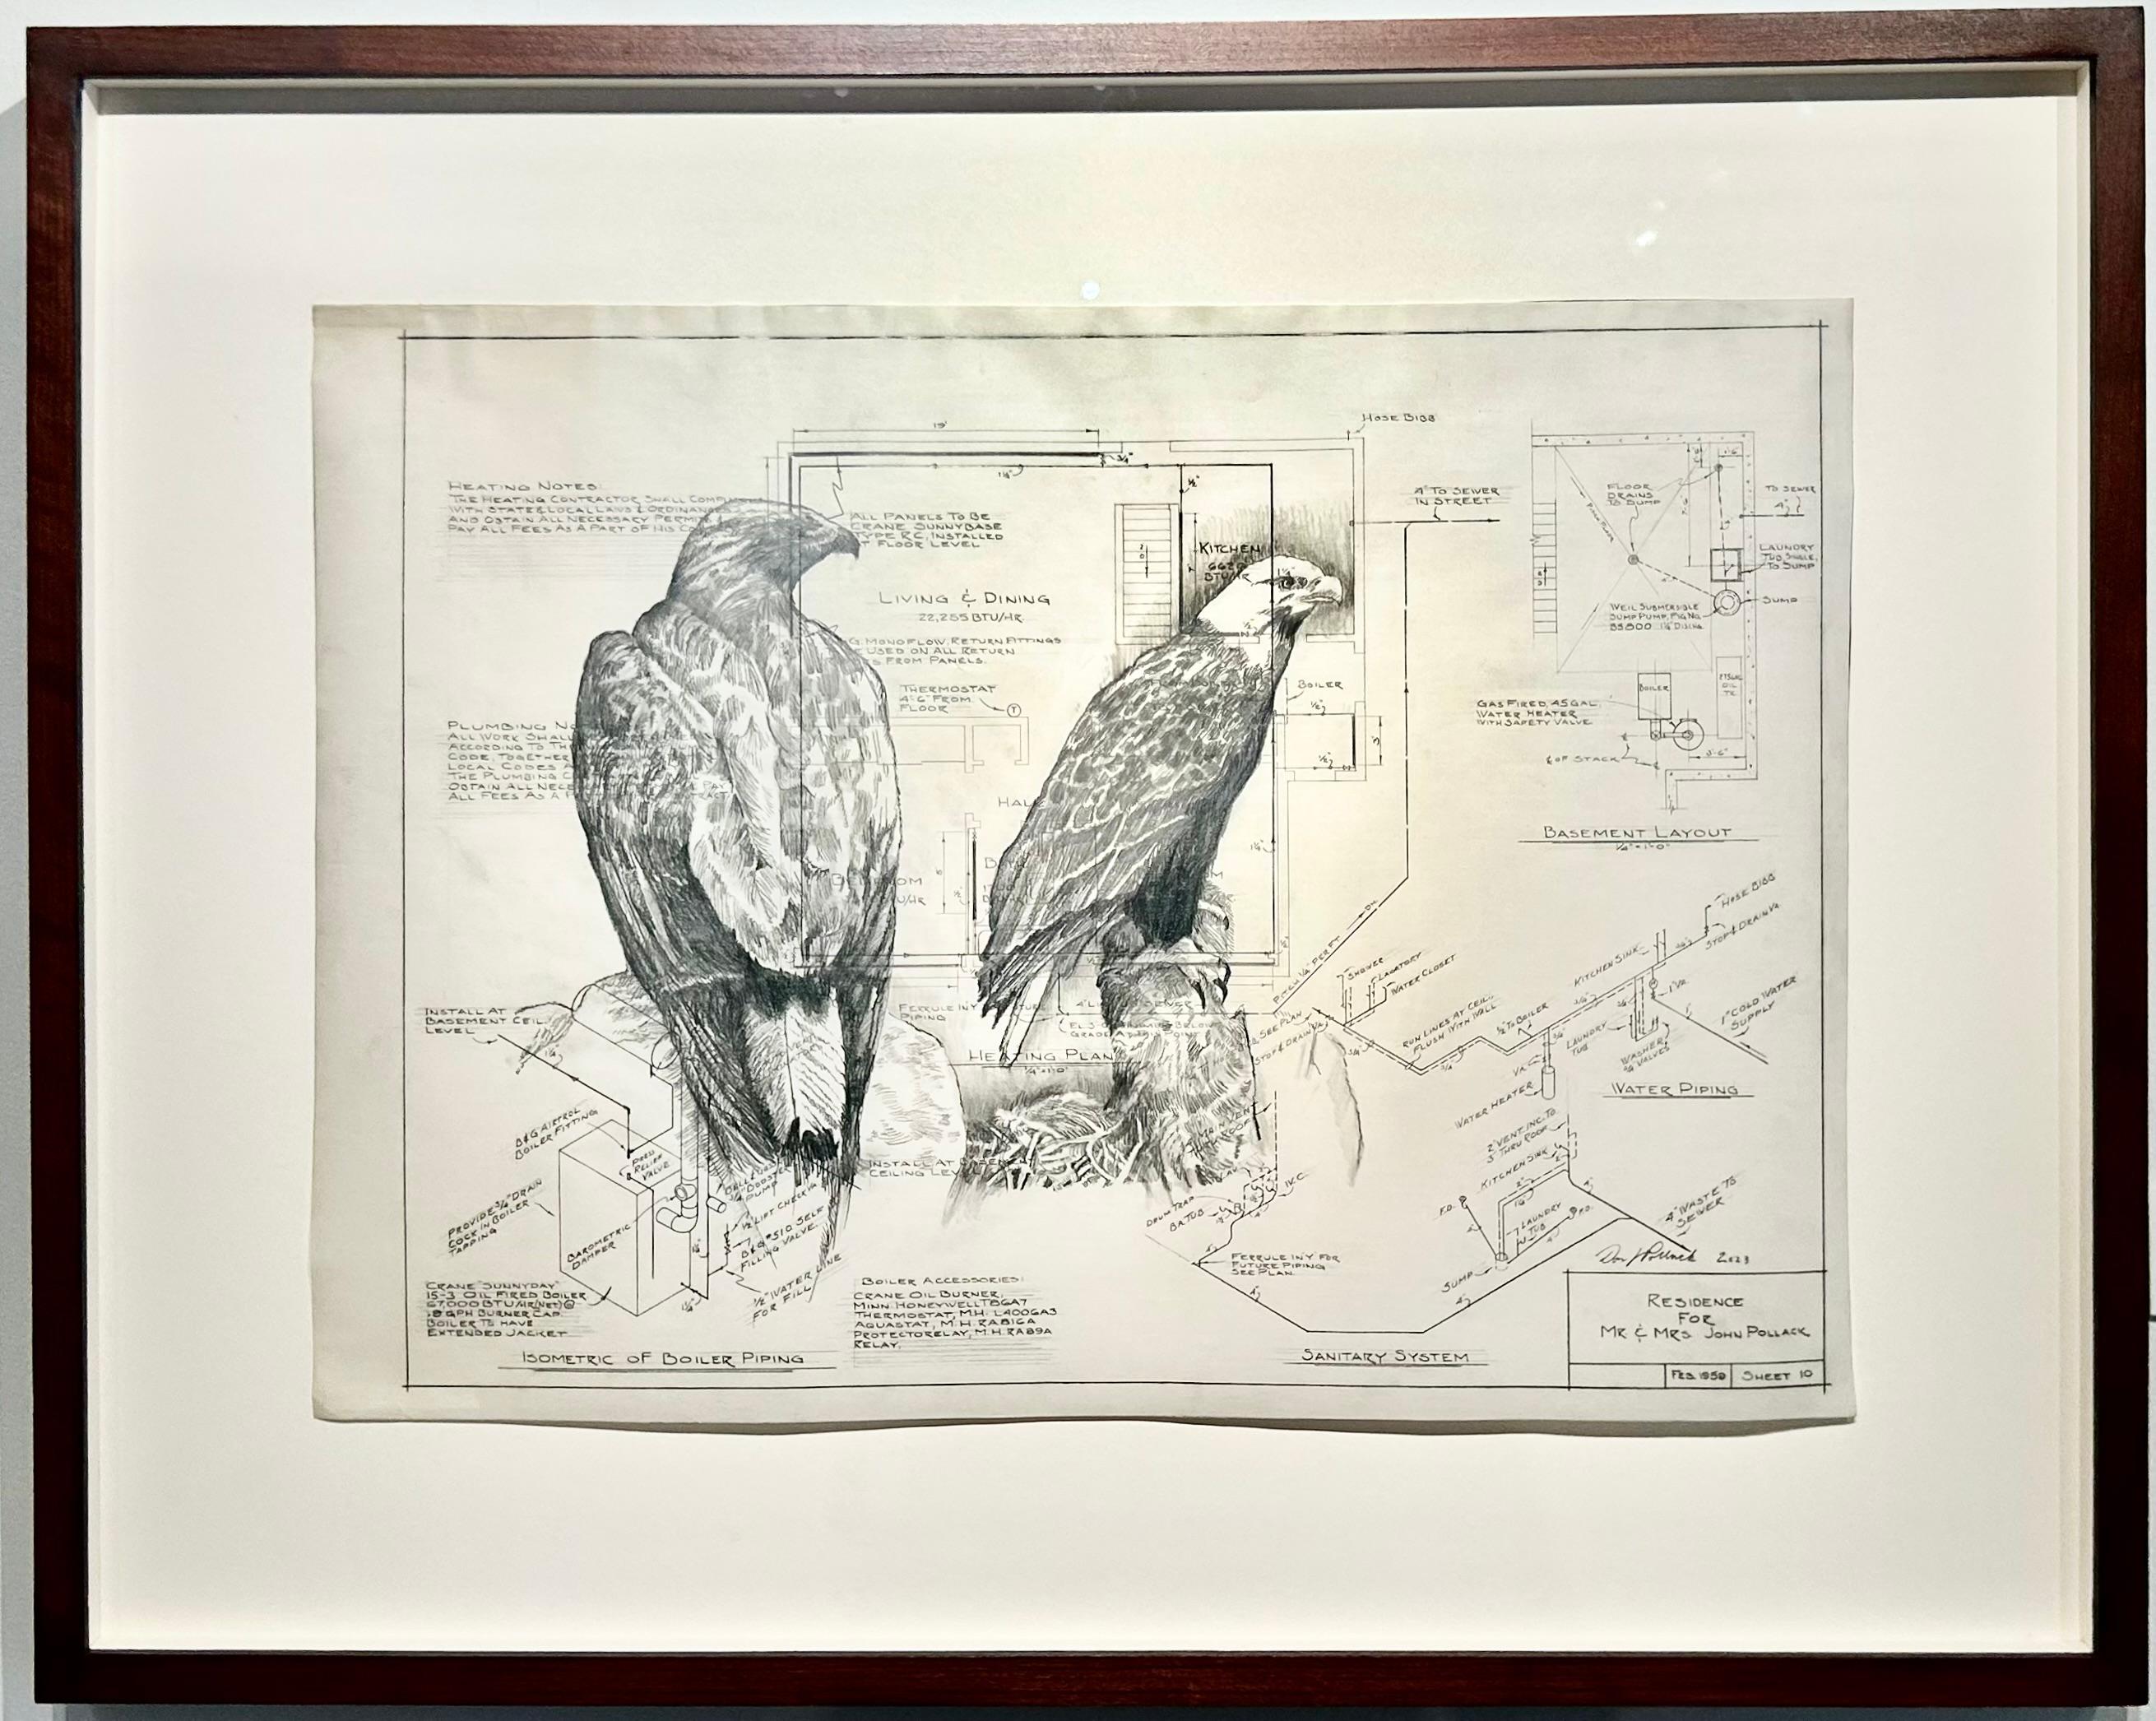 An Eye for Detail - Bald Eagles in Graphite on Antique Architectural Drawings  - Art by Don Pollack